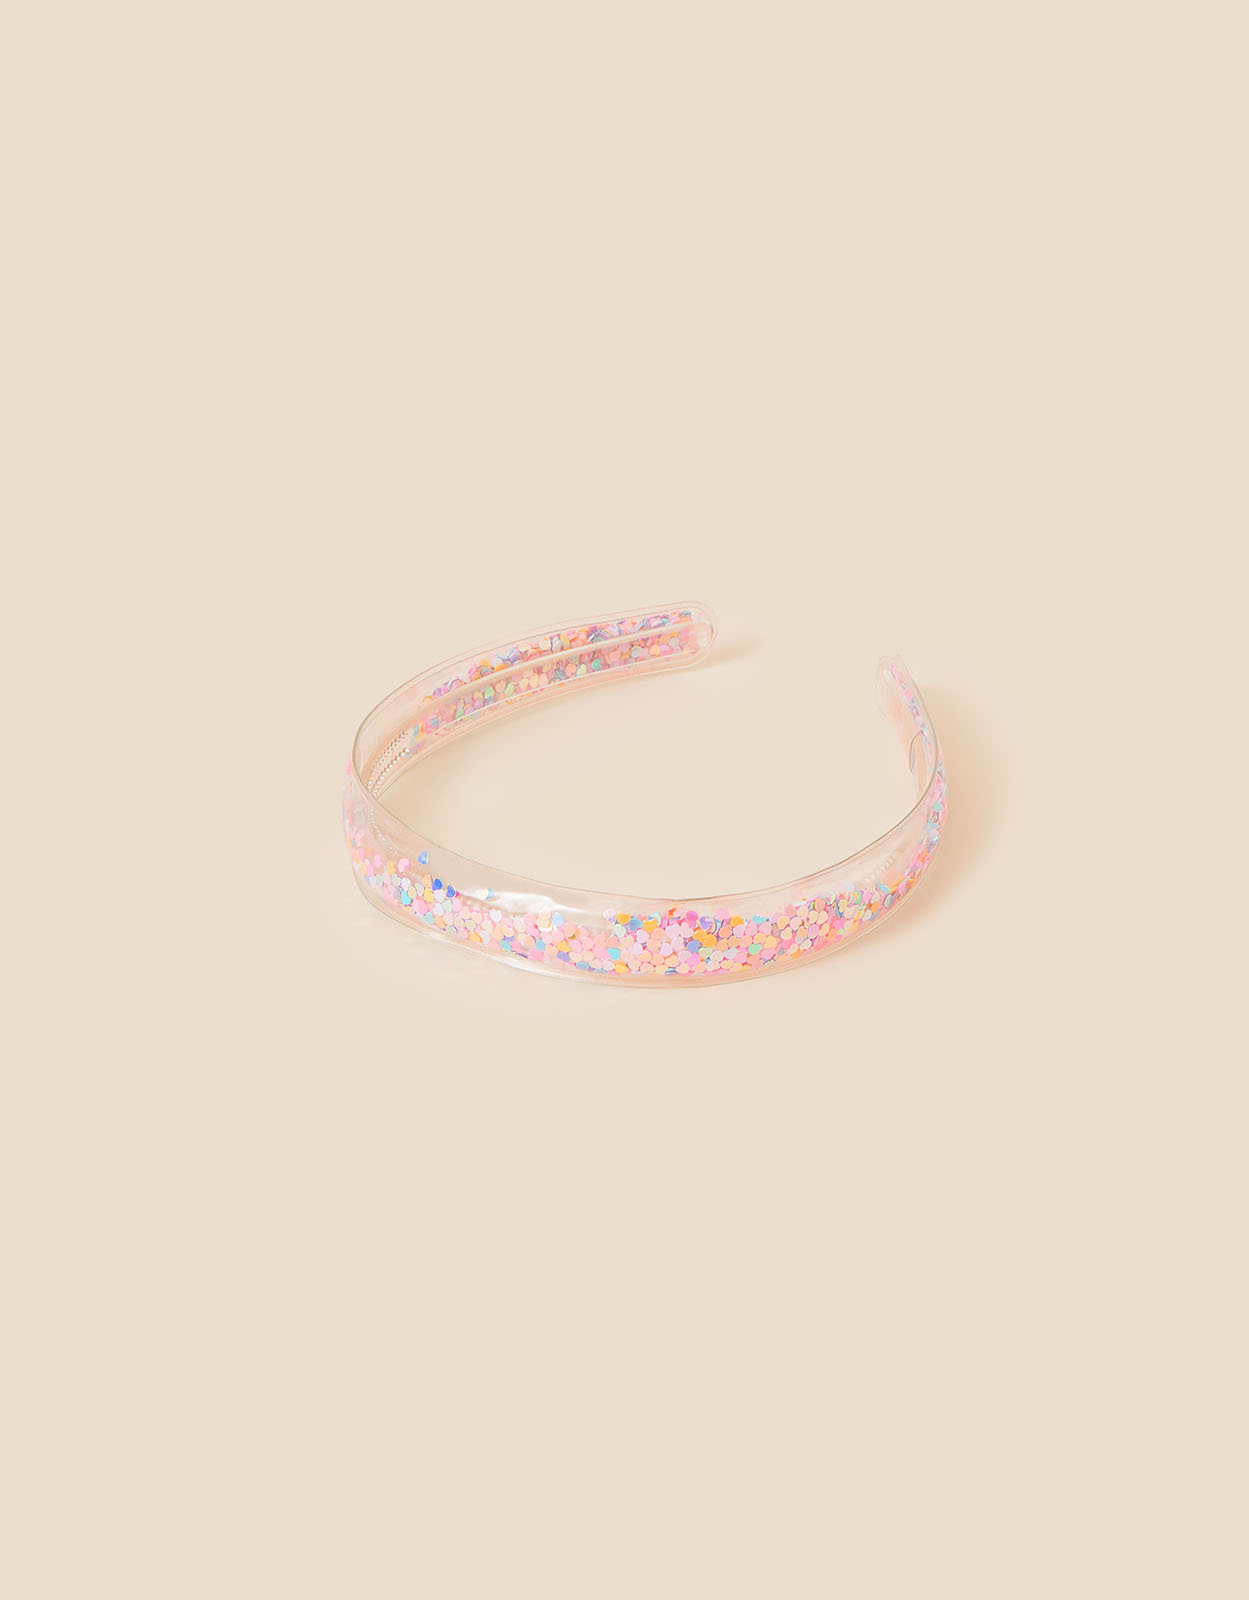 Accessorize Girl's Pink/Blue Shake Sequin Headband, Size: One Size